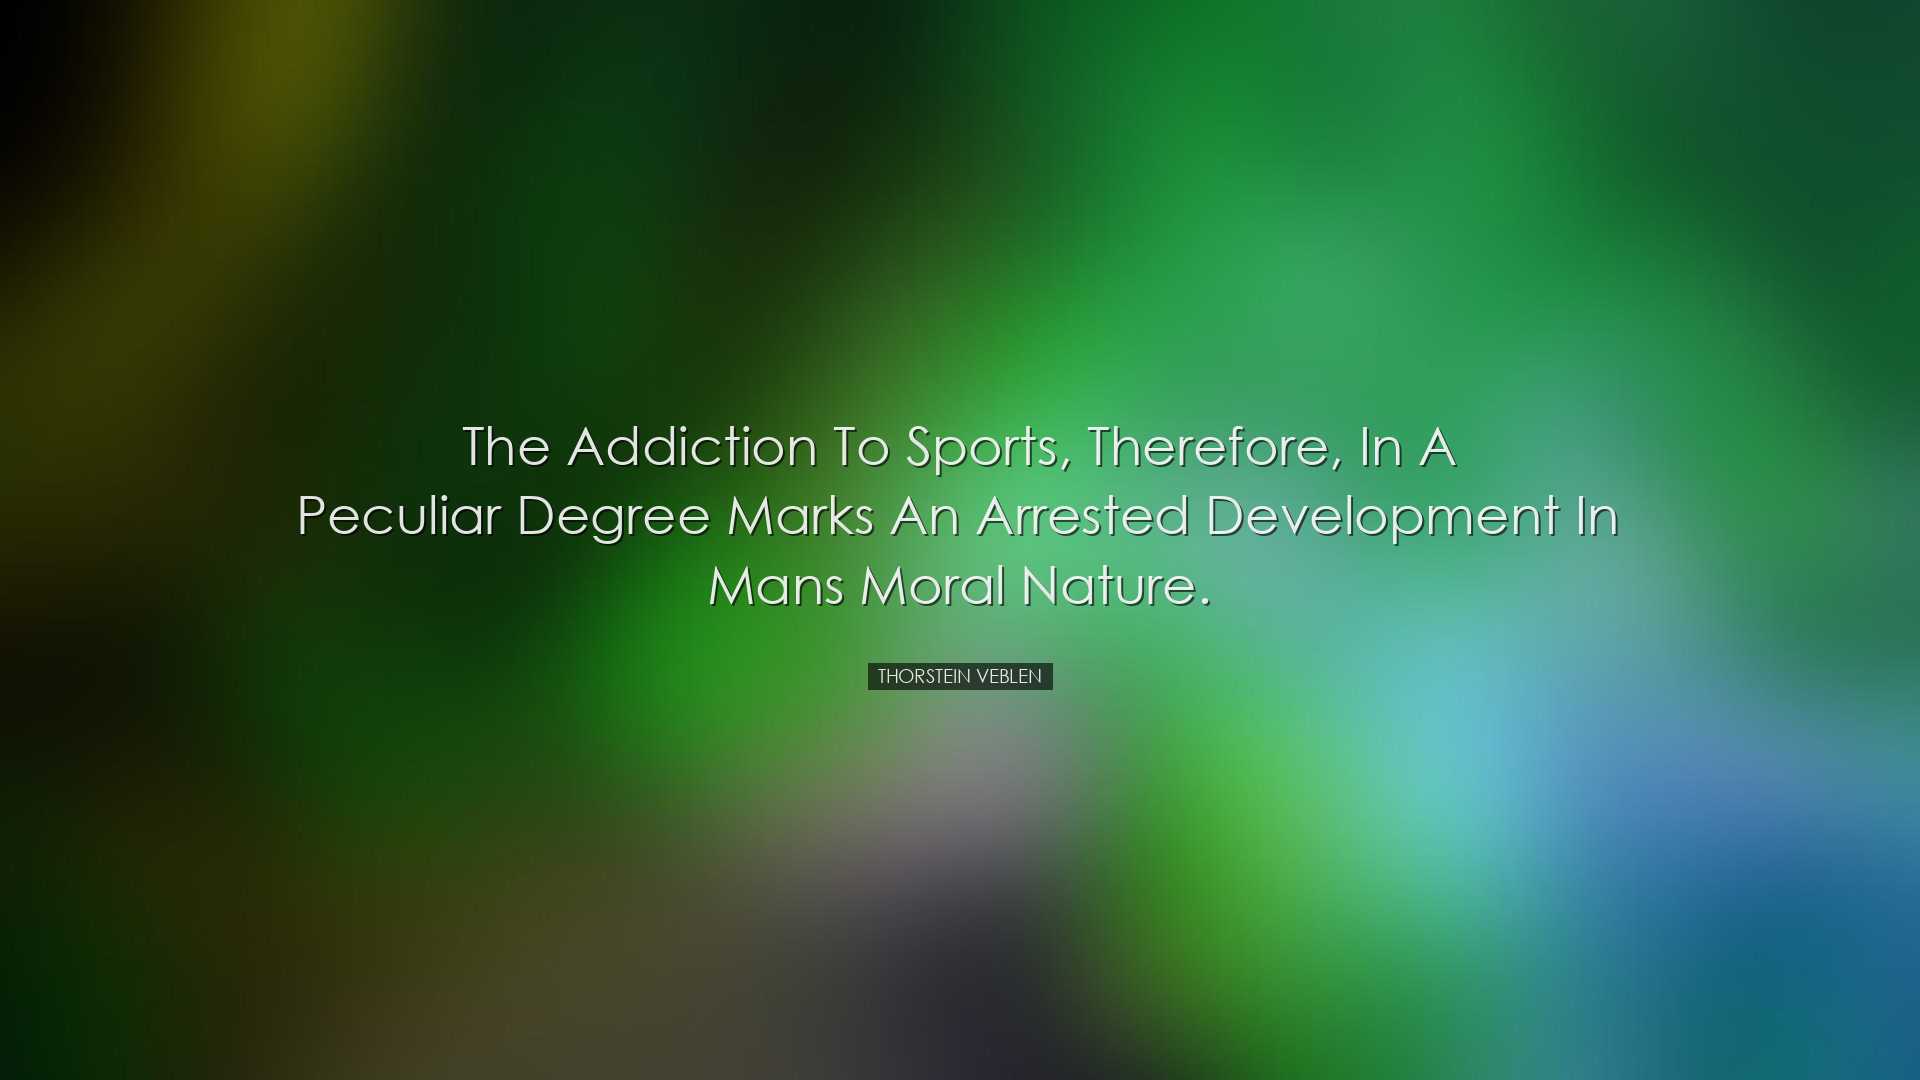 The addiction to sports, therefore, in a peculiar degree marks an